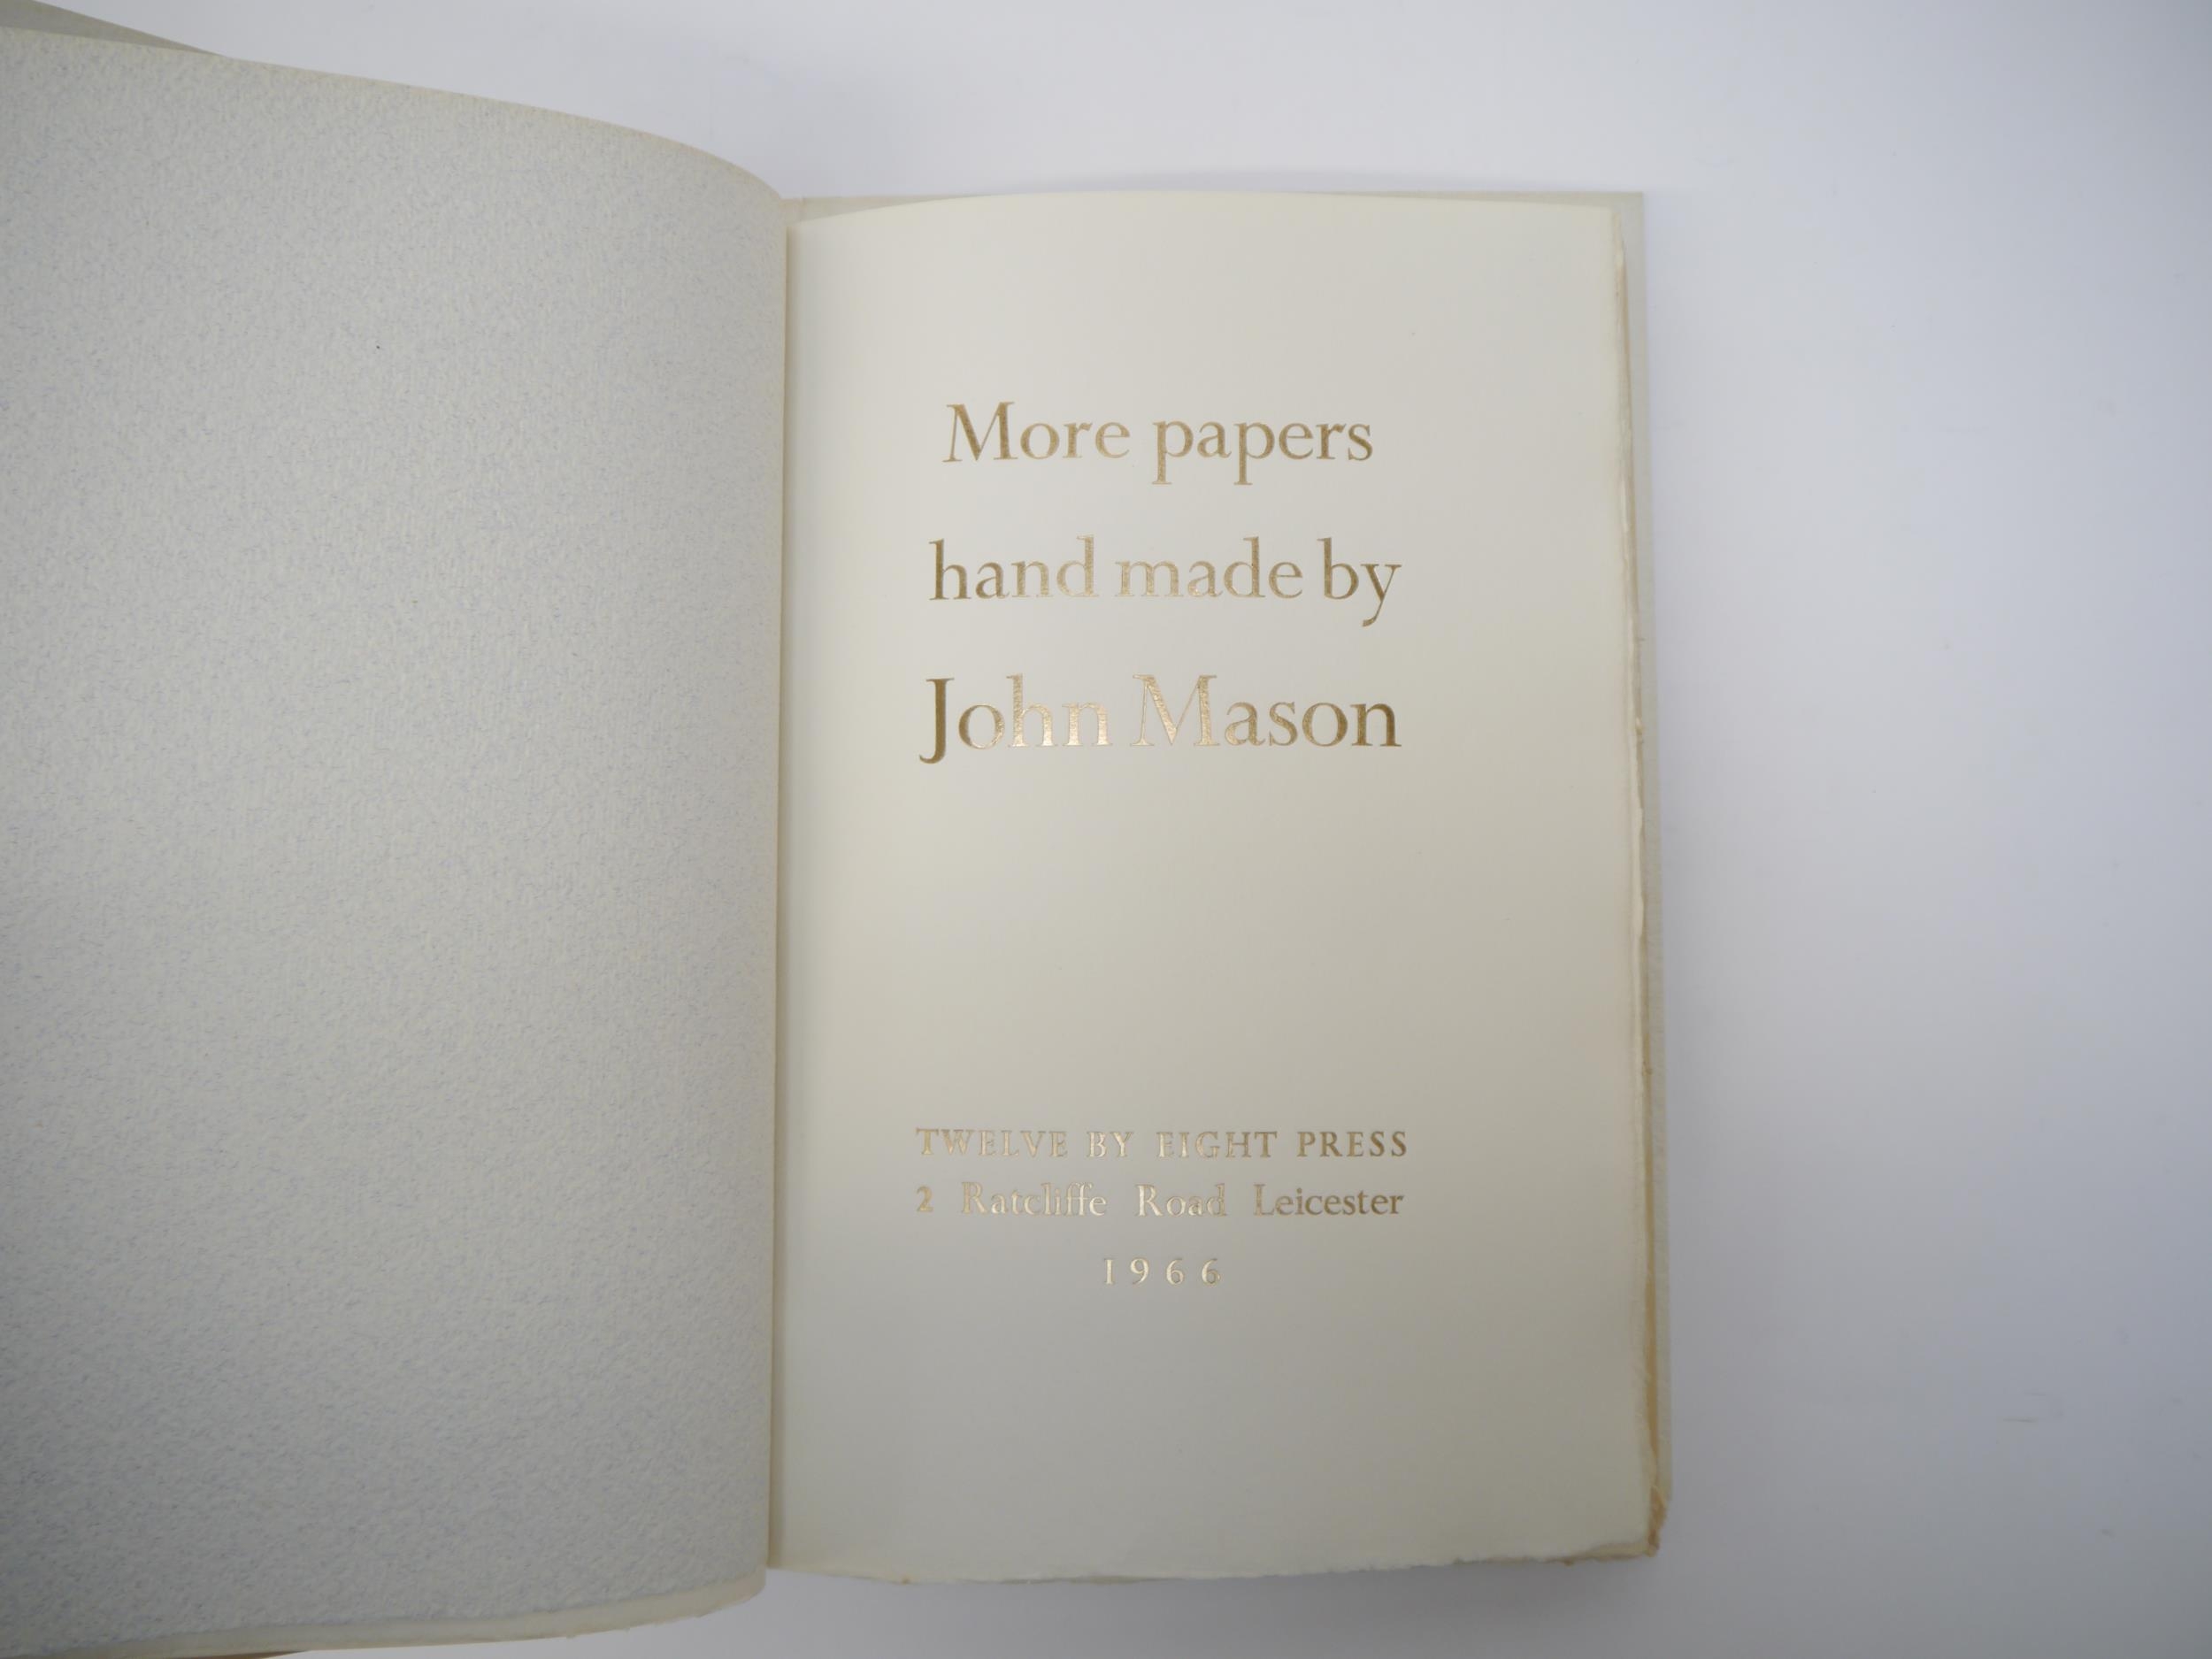 (Twelve by Eight Press.) John Mason: 'More papers handmade by John Mason', Leicester, Twelve by - Image 11 of 13